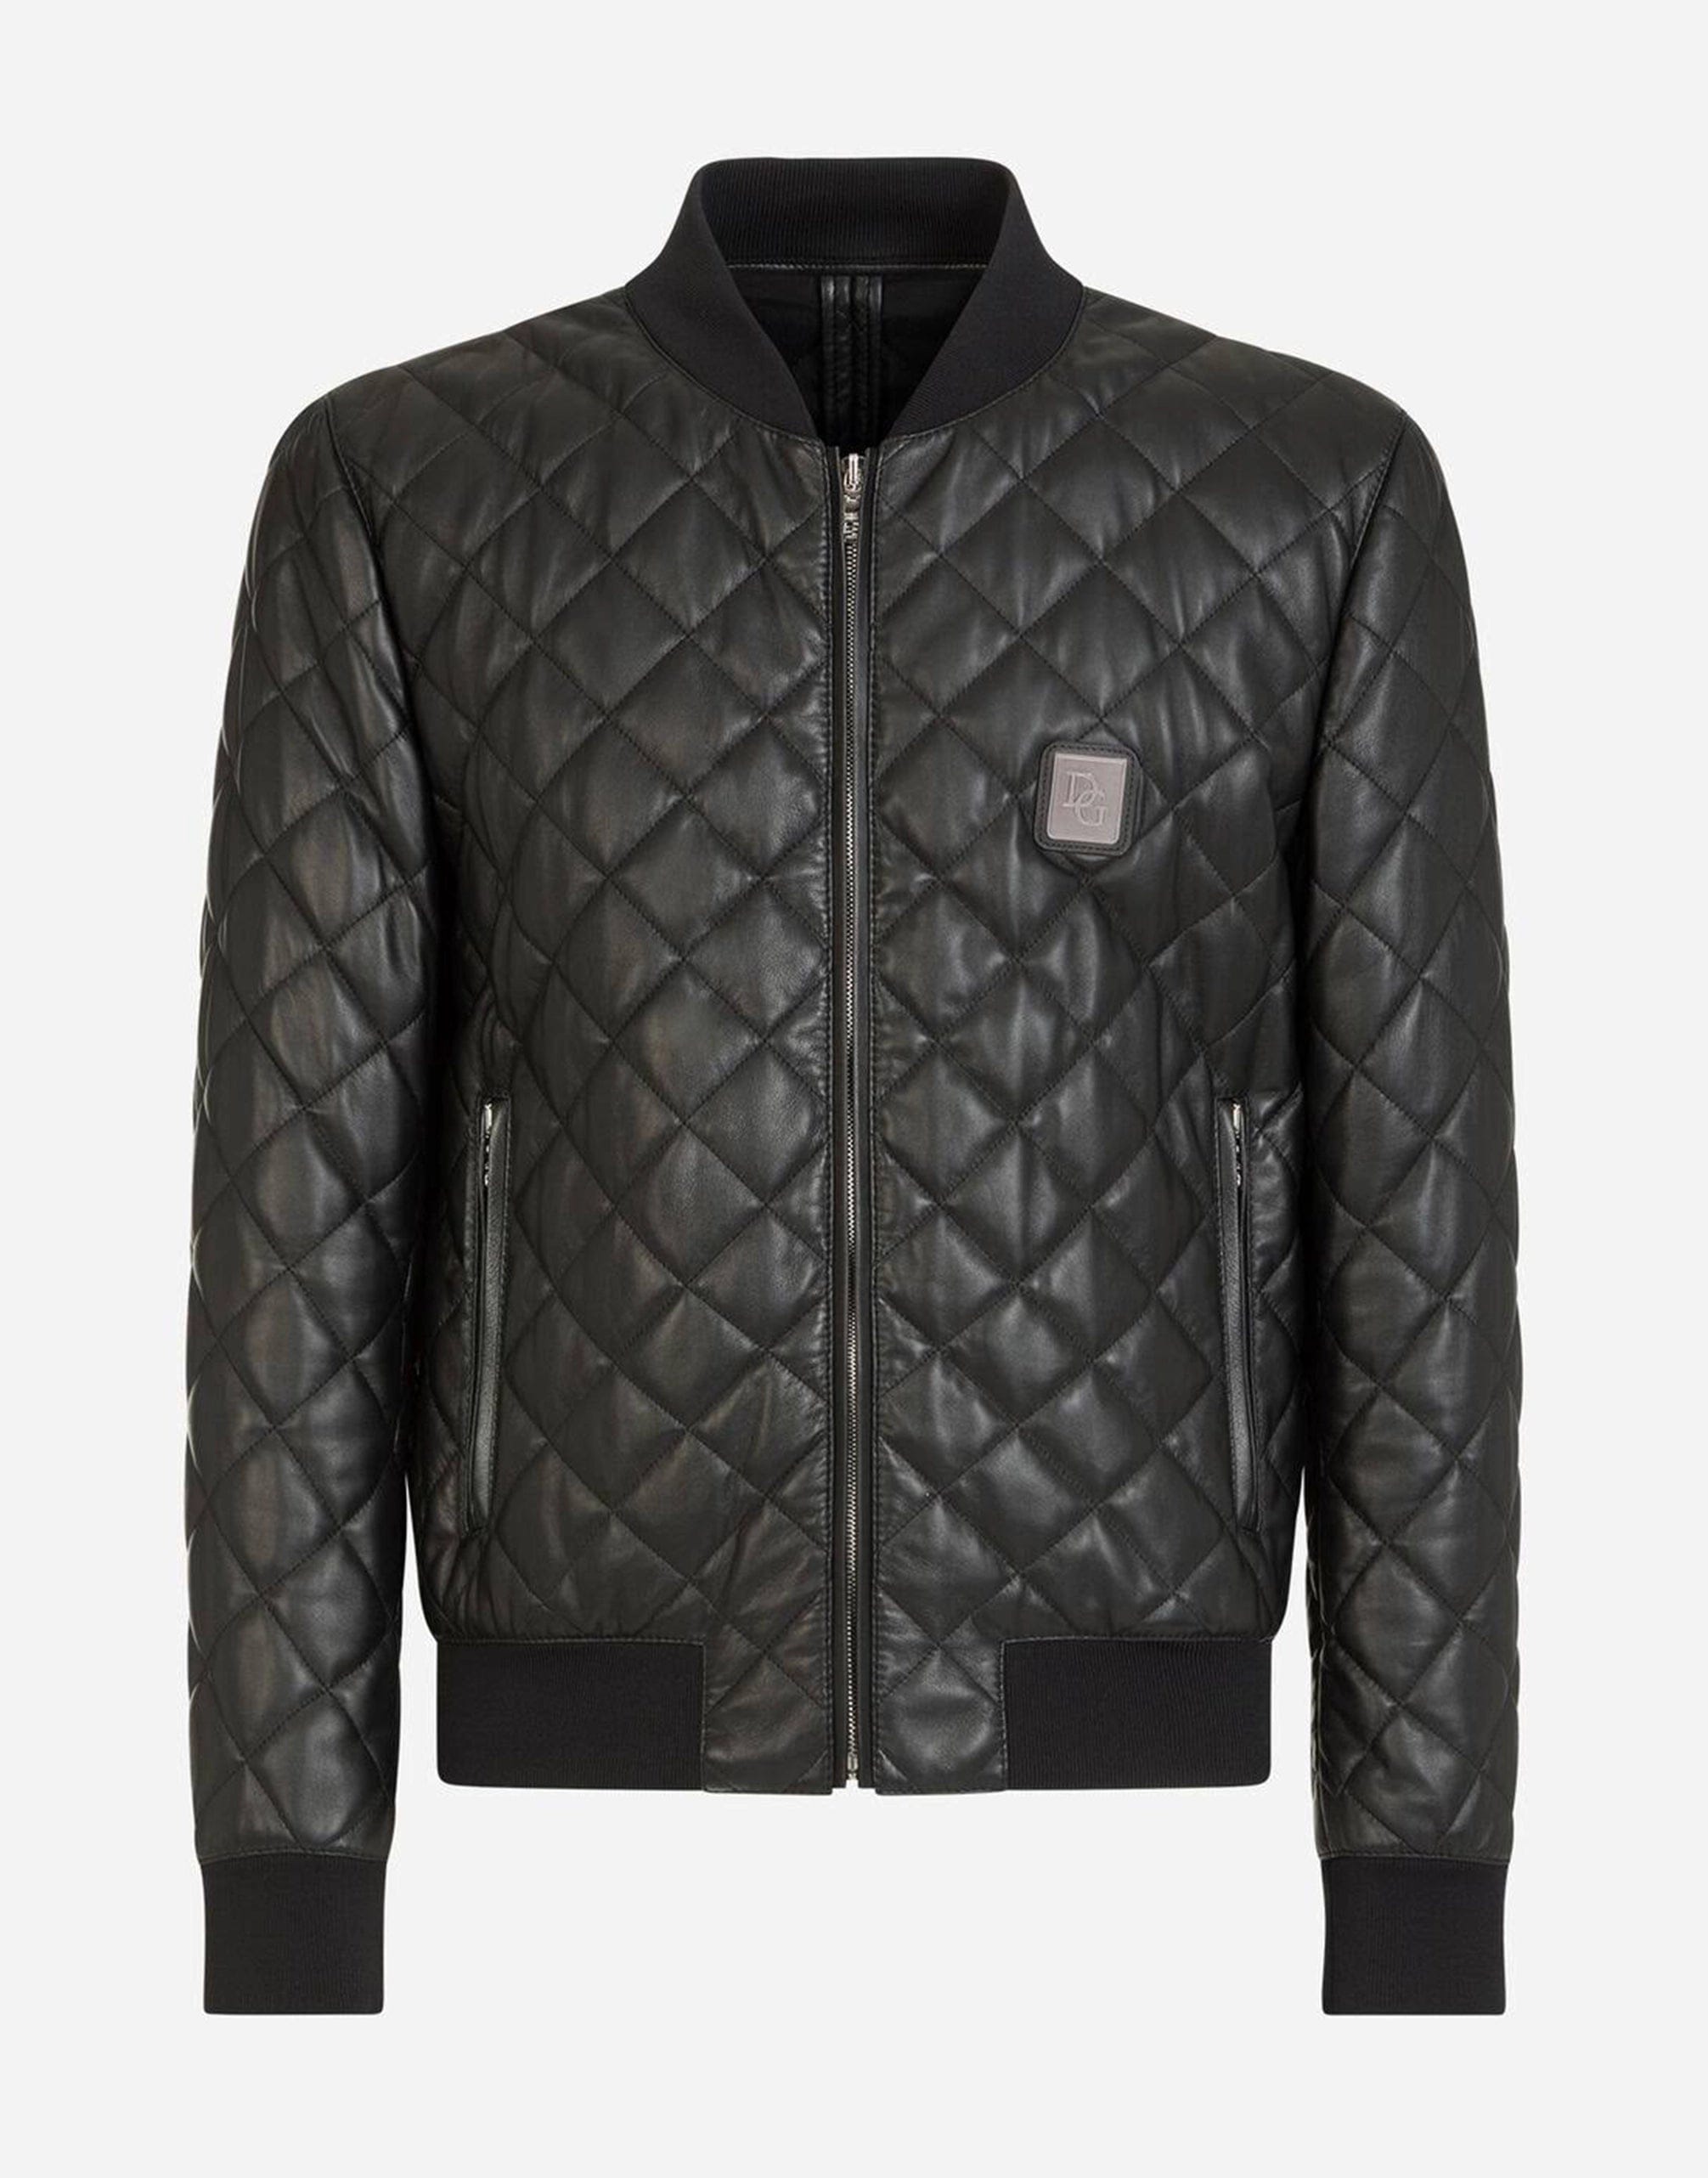 Dolce & Gabbana Quilted Leather Jacket With Branded Plate